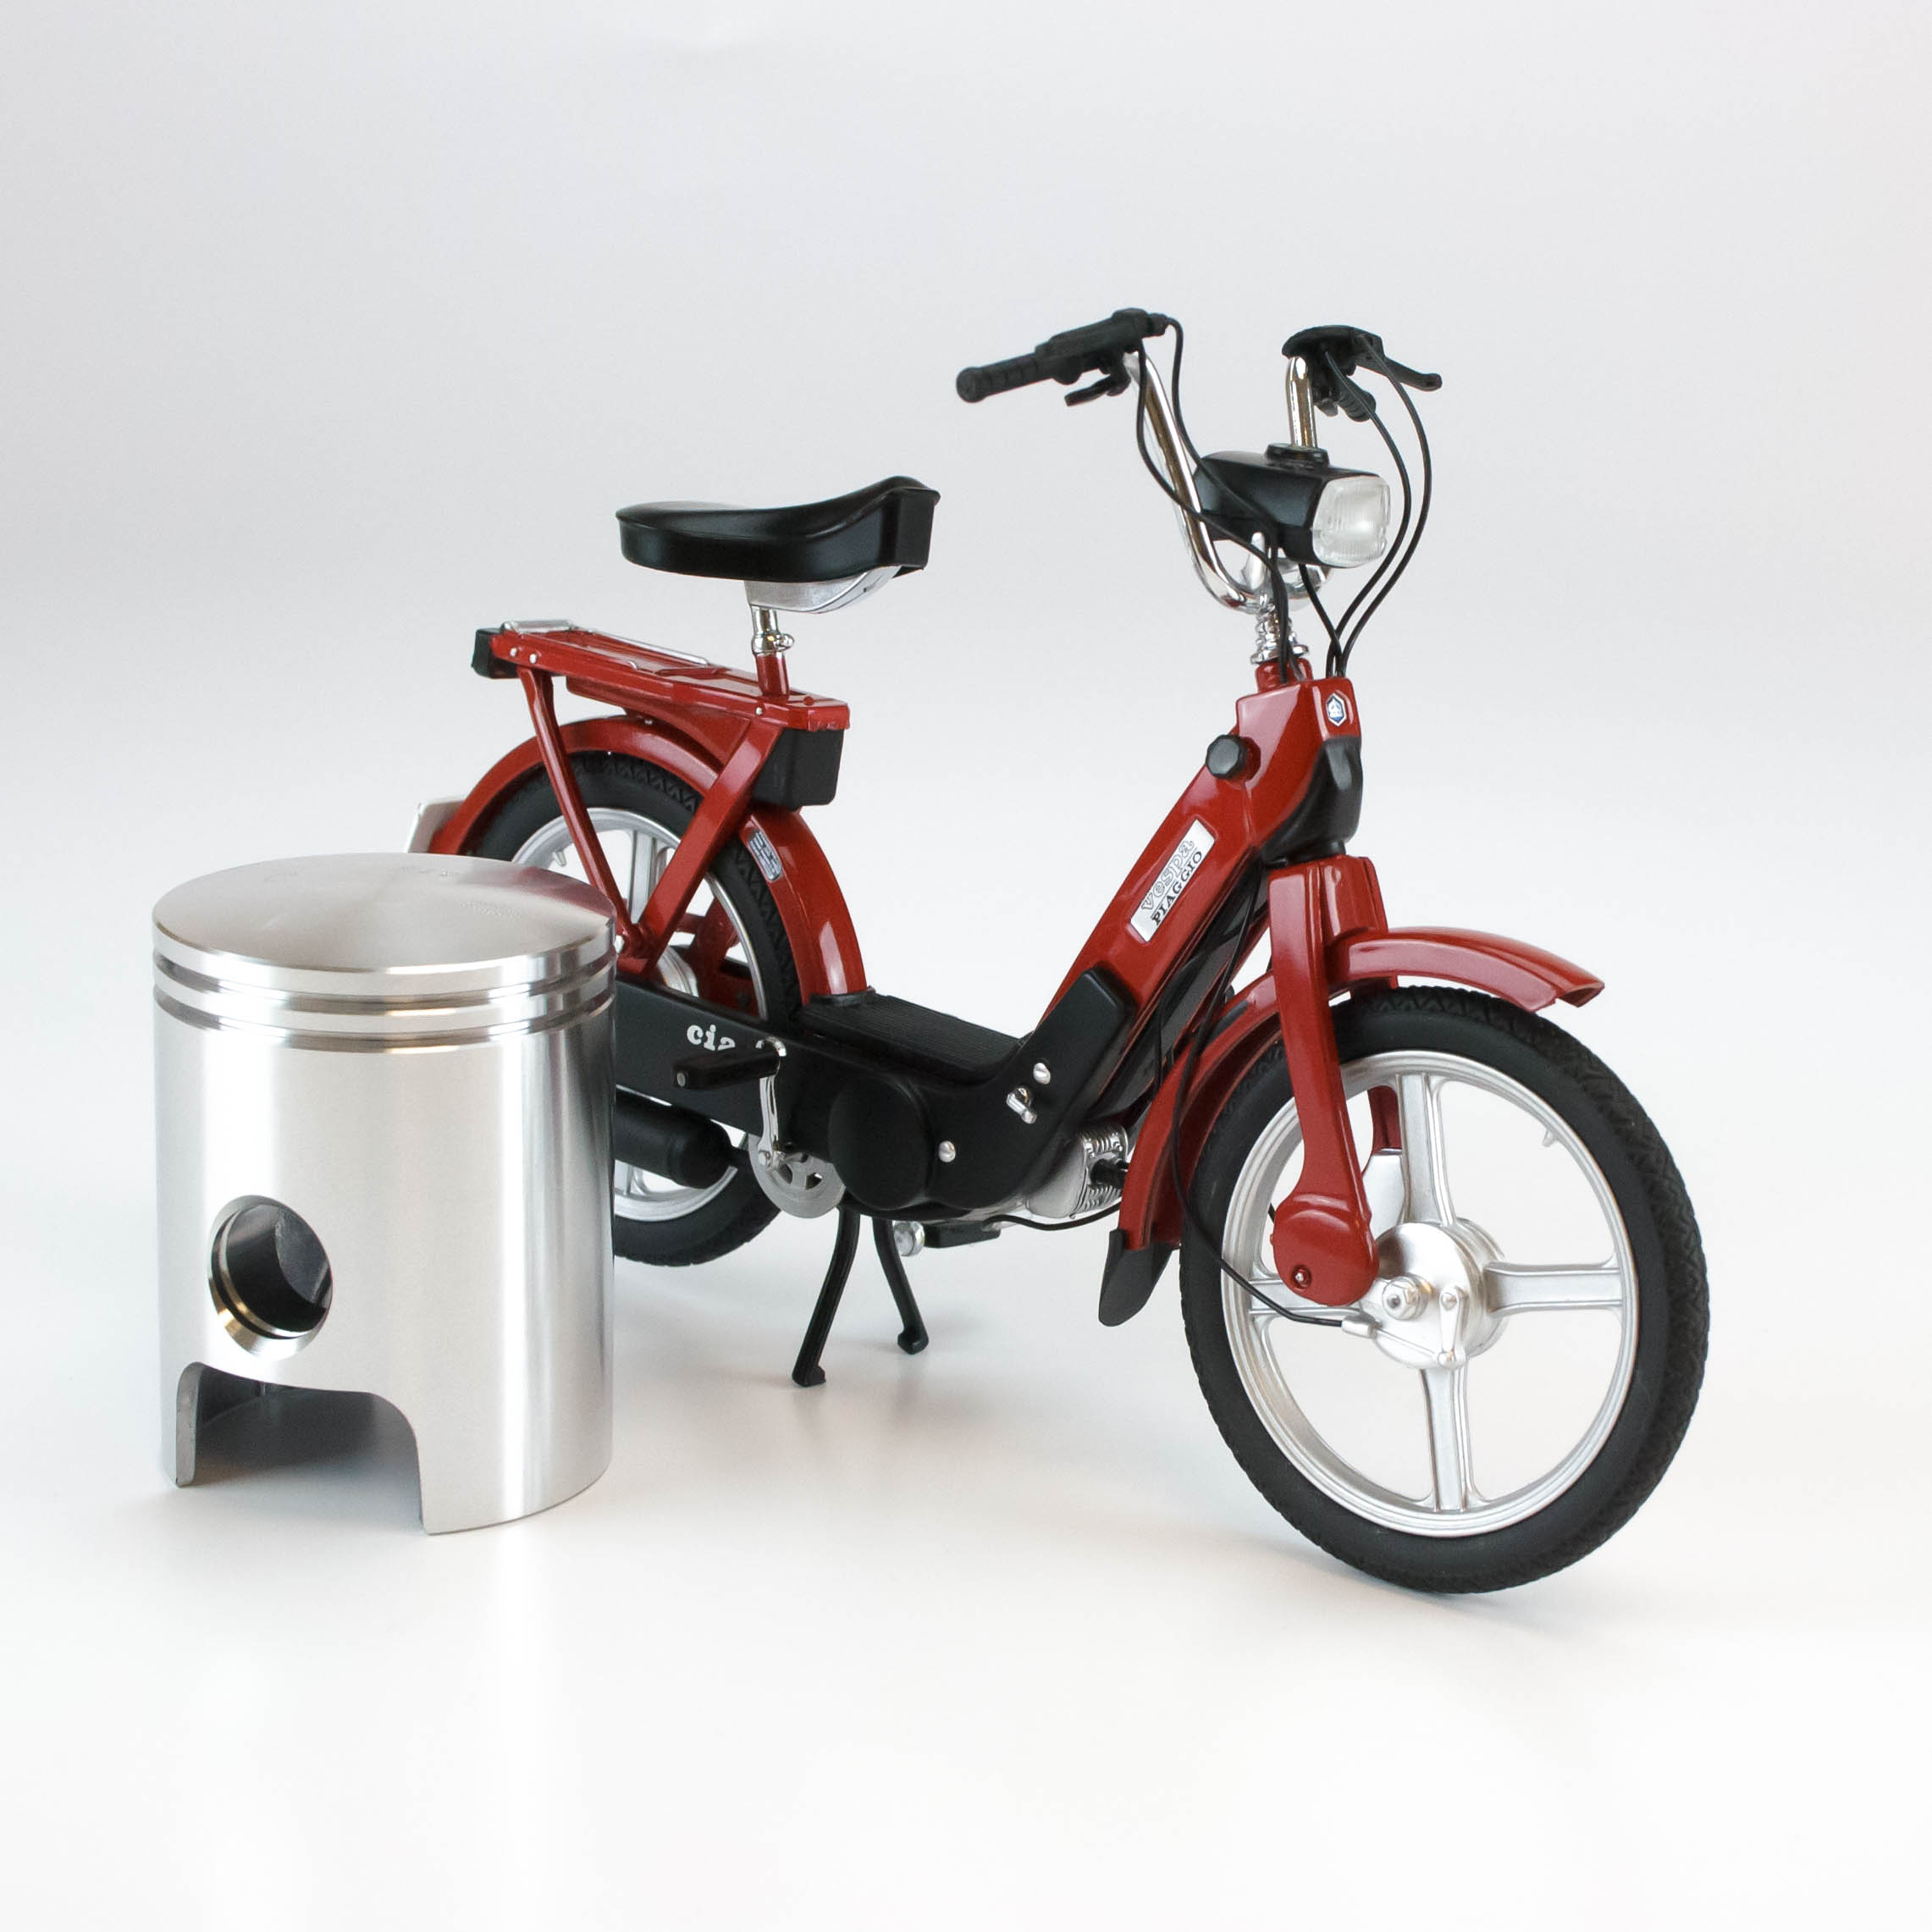 Model Puch Maxi red scale 1:10 - Mopedrenovering